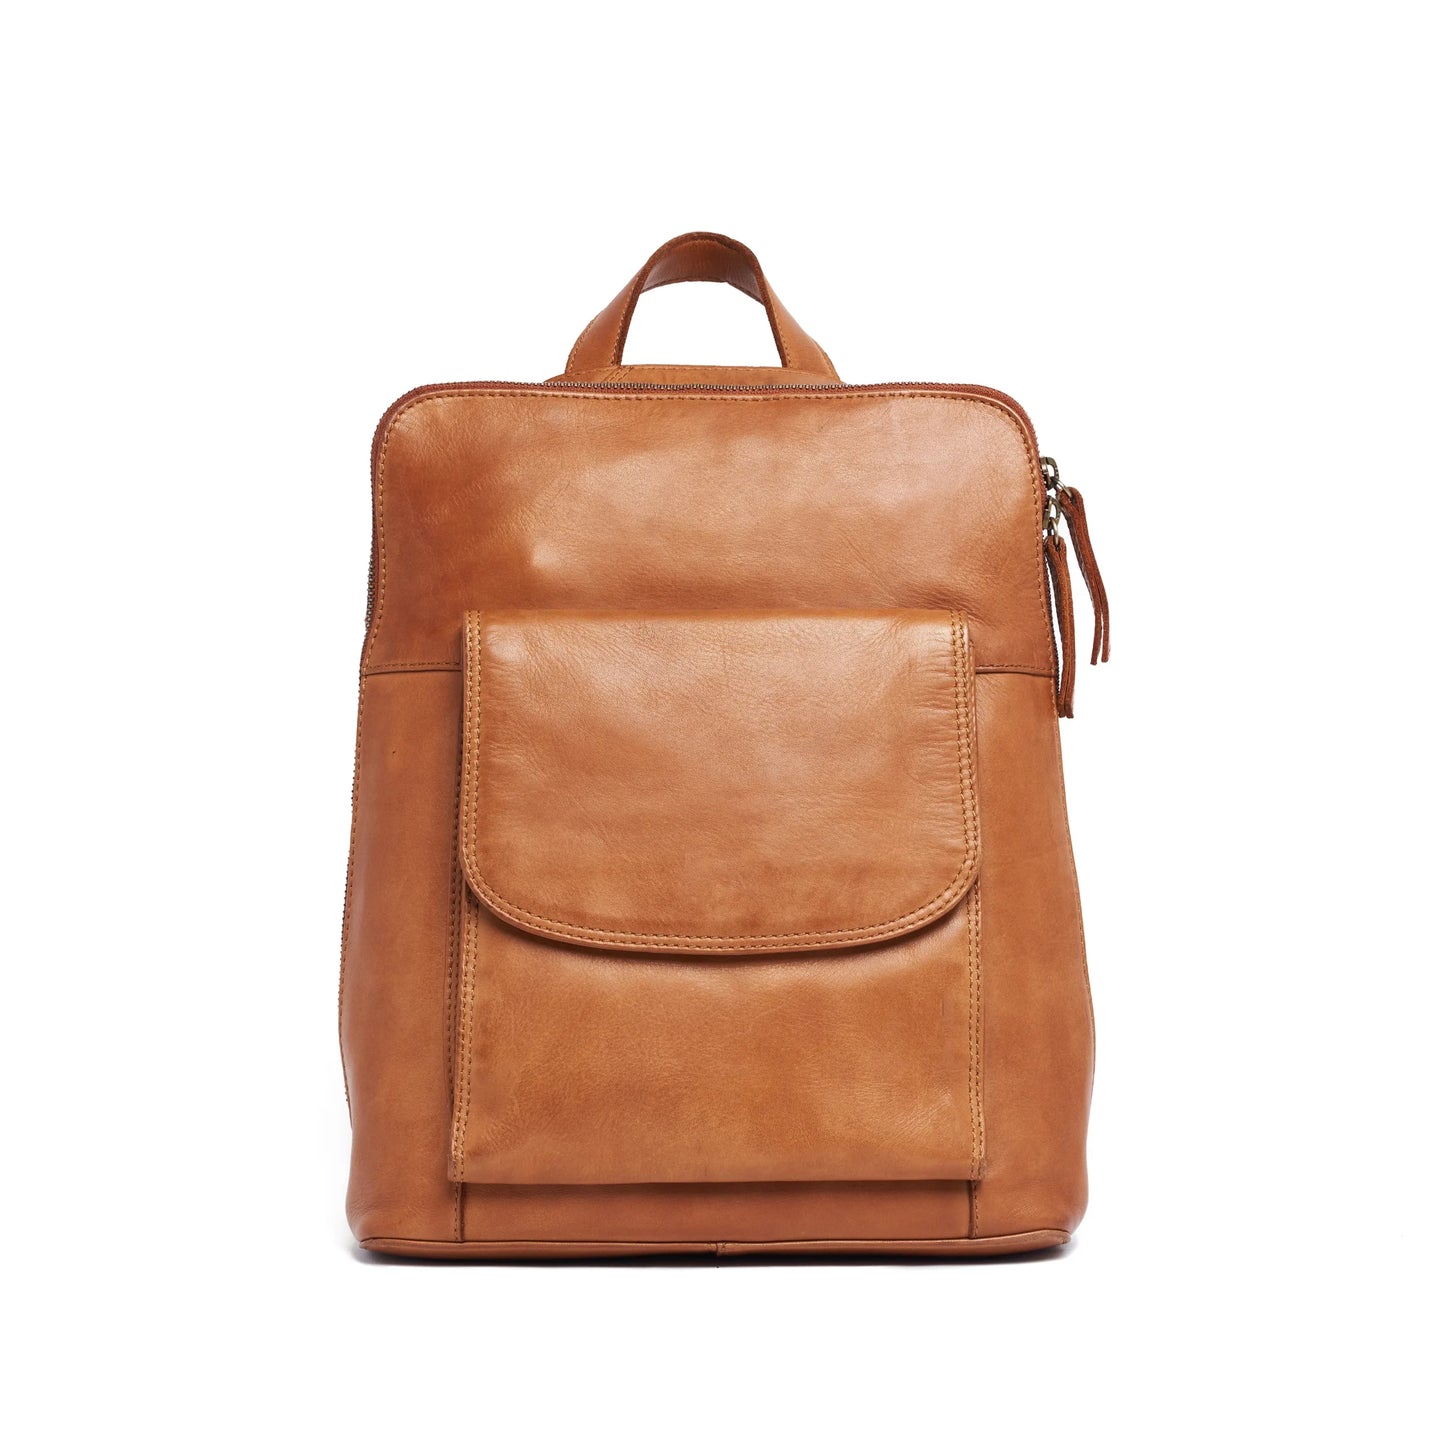 Rugged Hide RH-4622 Vanessa leather backpack